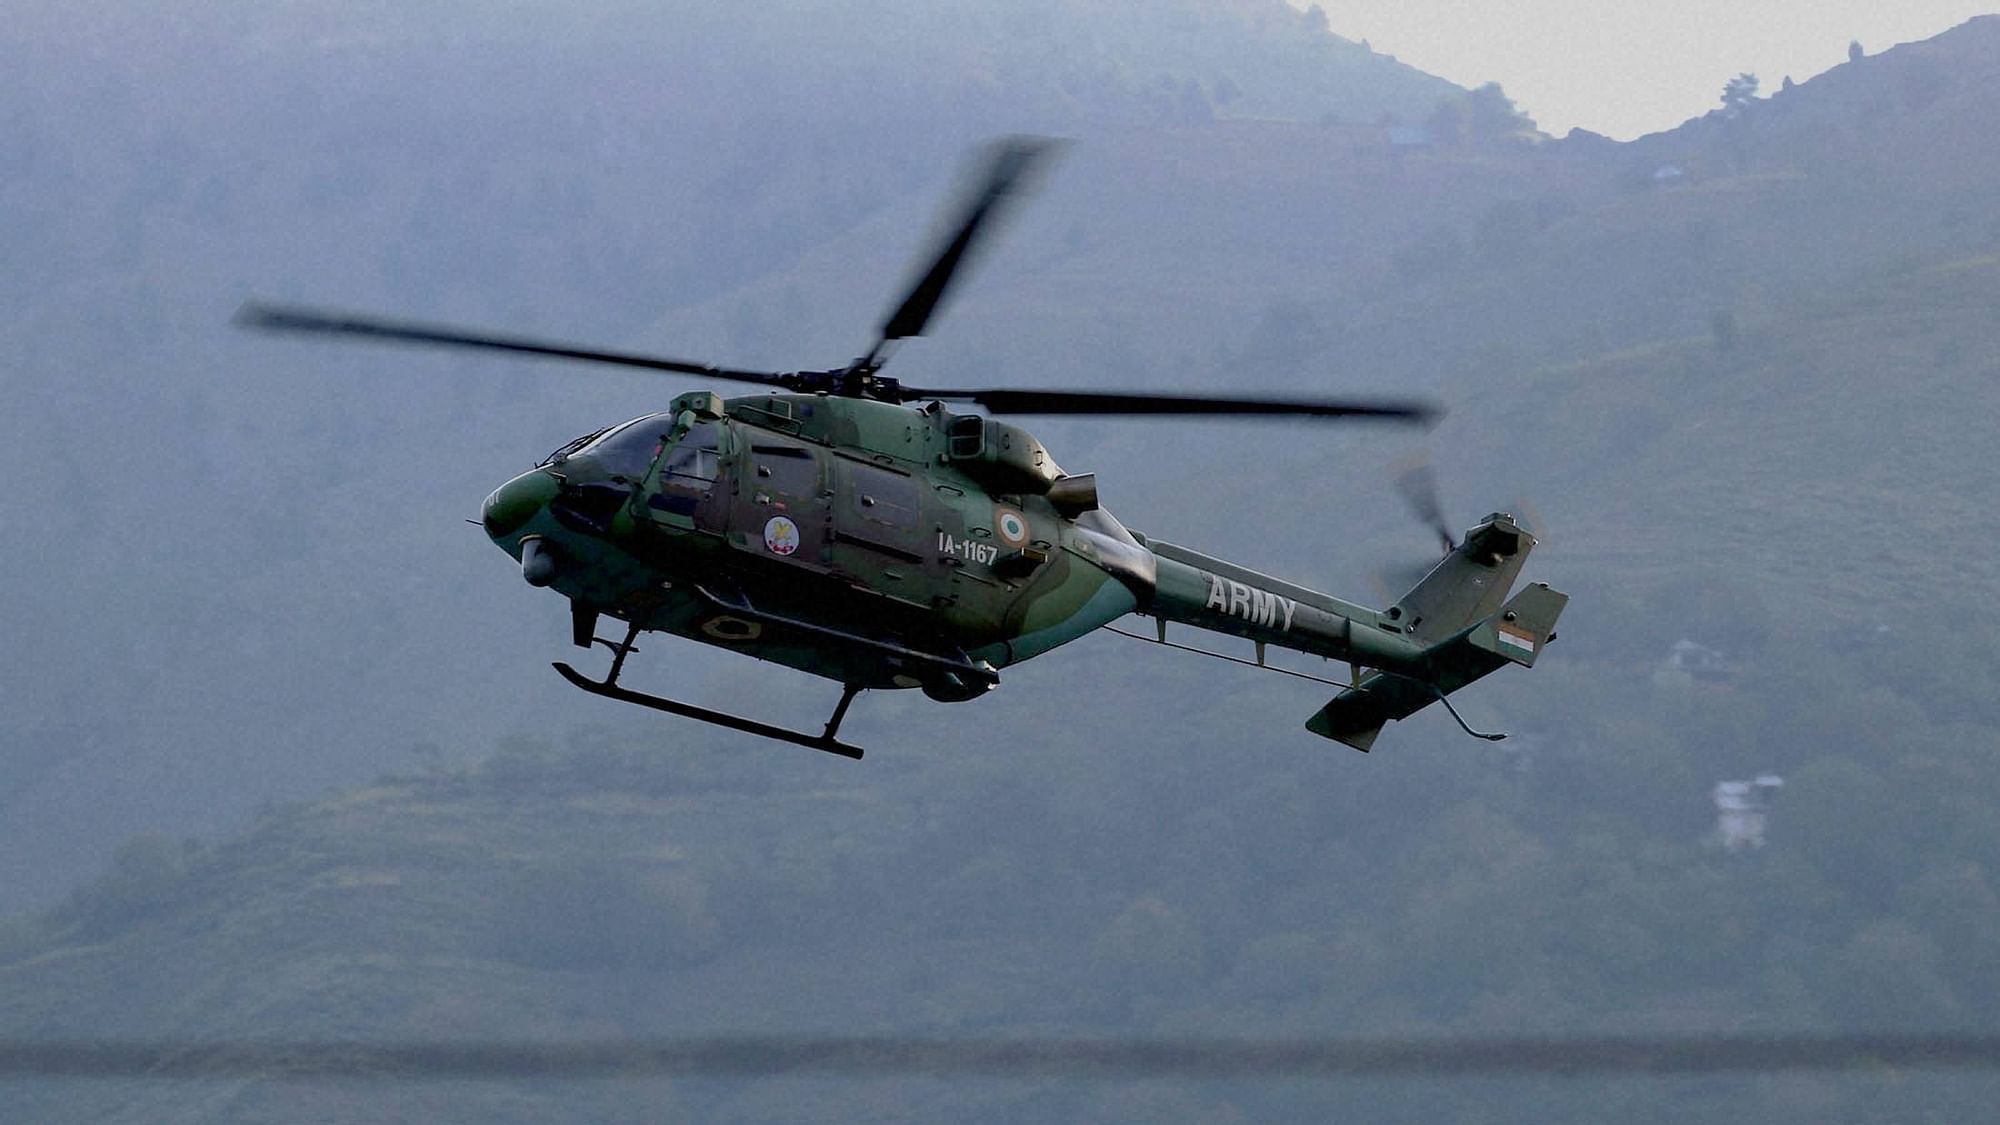 An Indian army helicopter flies above the Army base which was attacked by in the town of Uri, west of Srinagar. (Photo: AP)